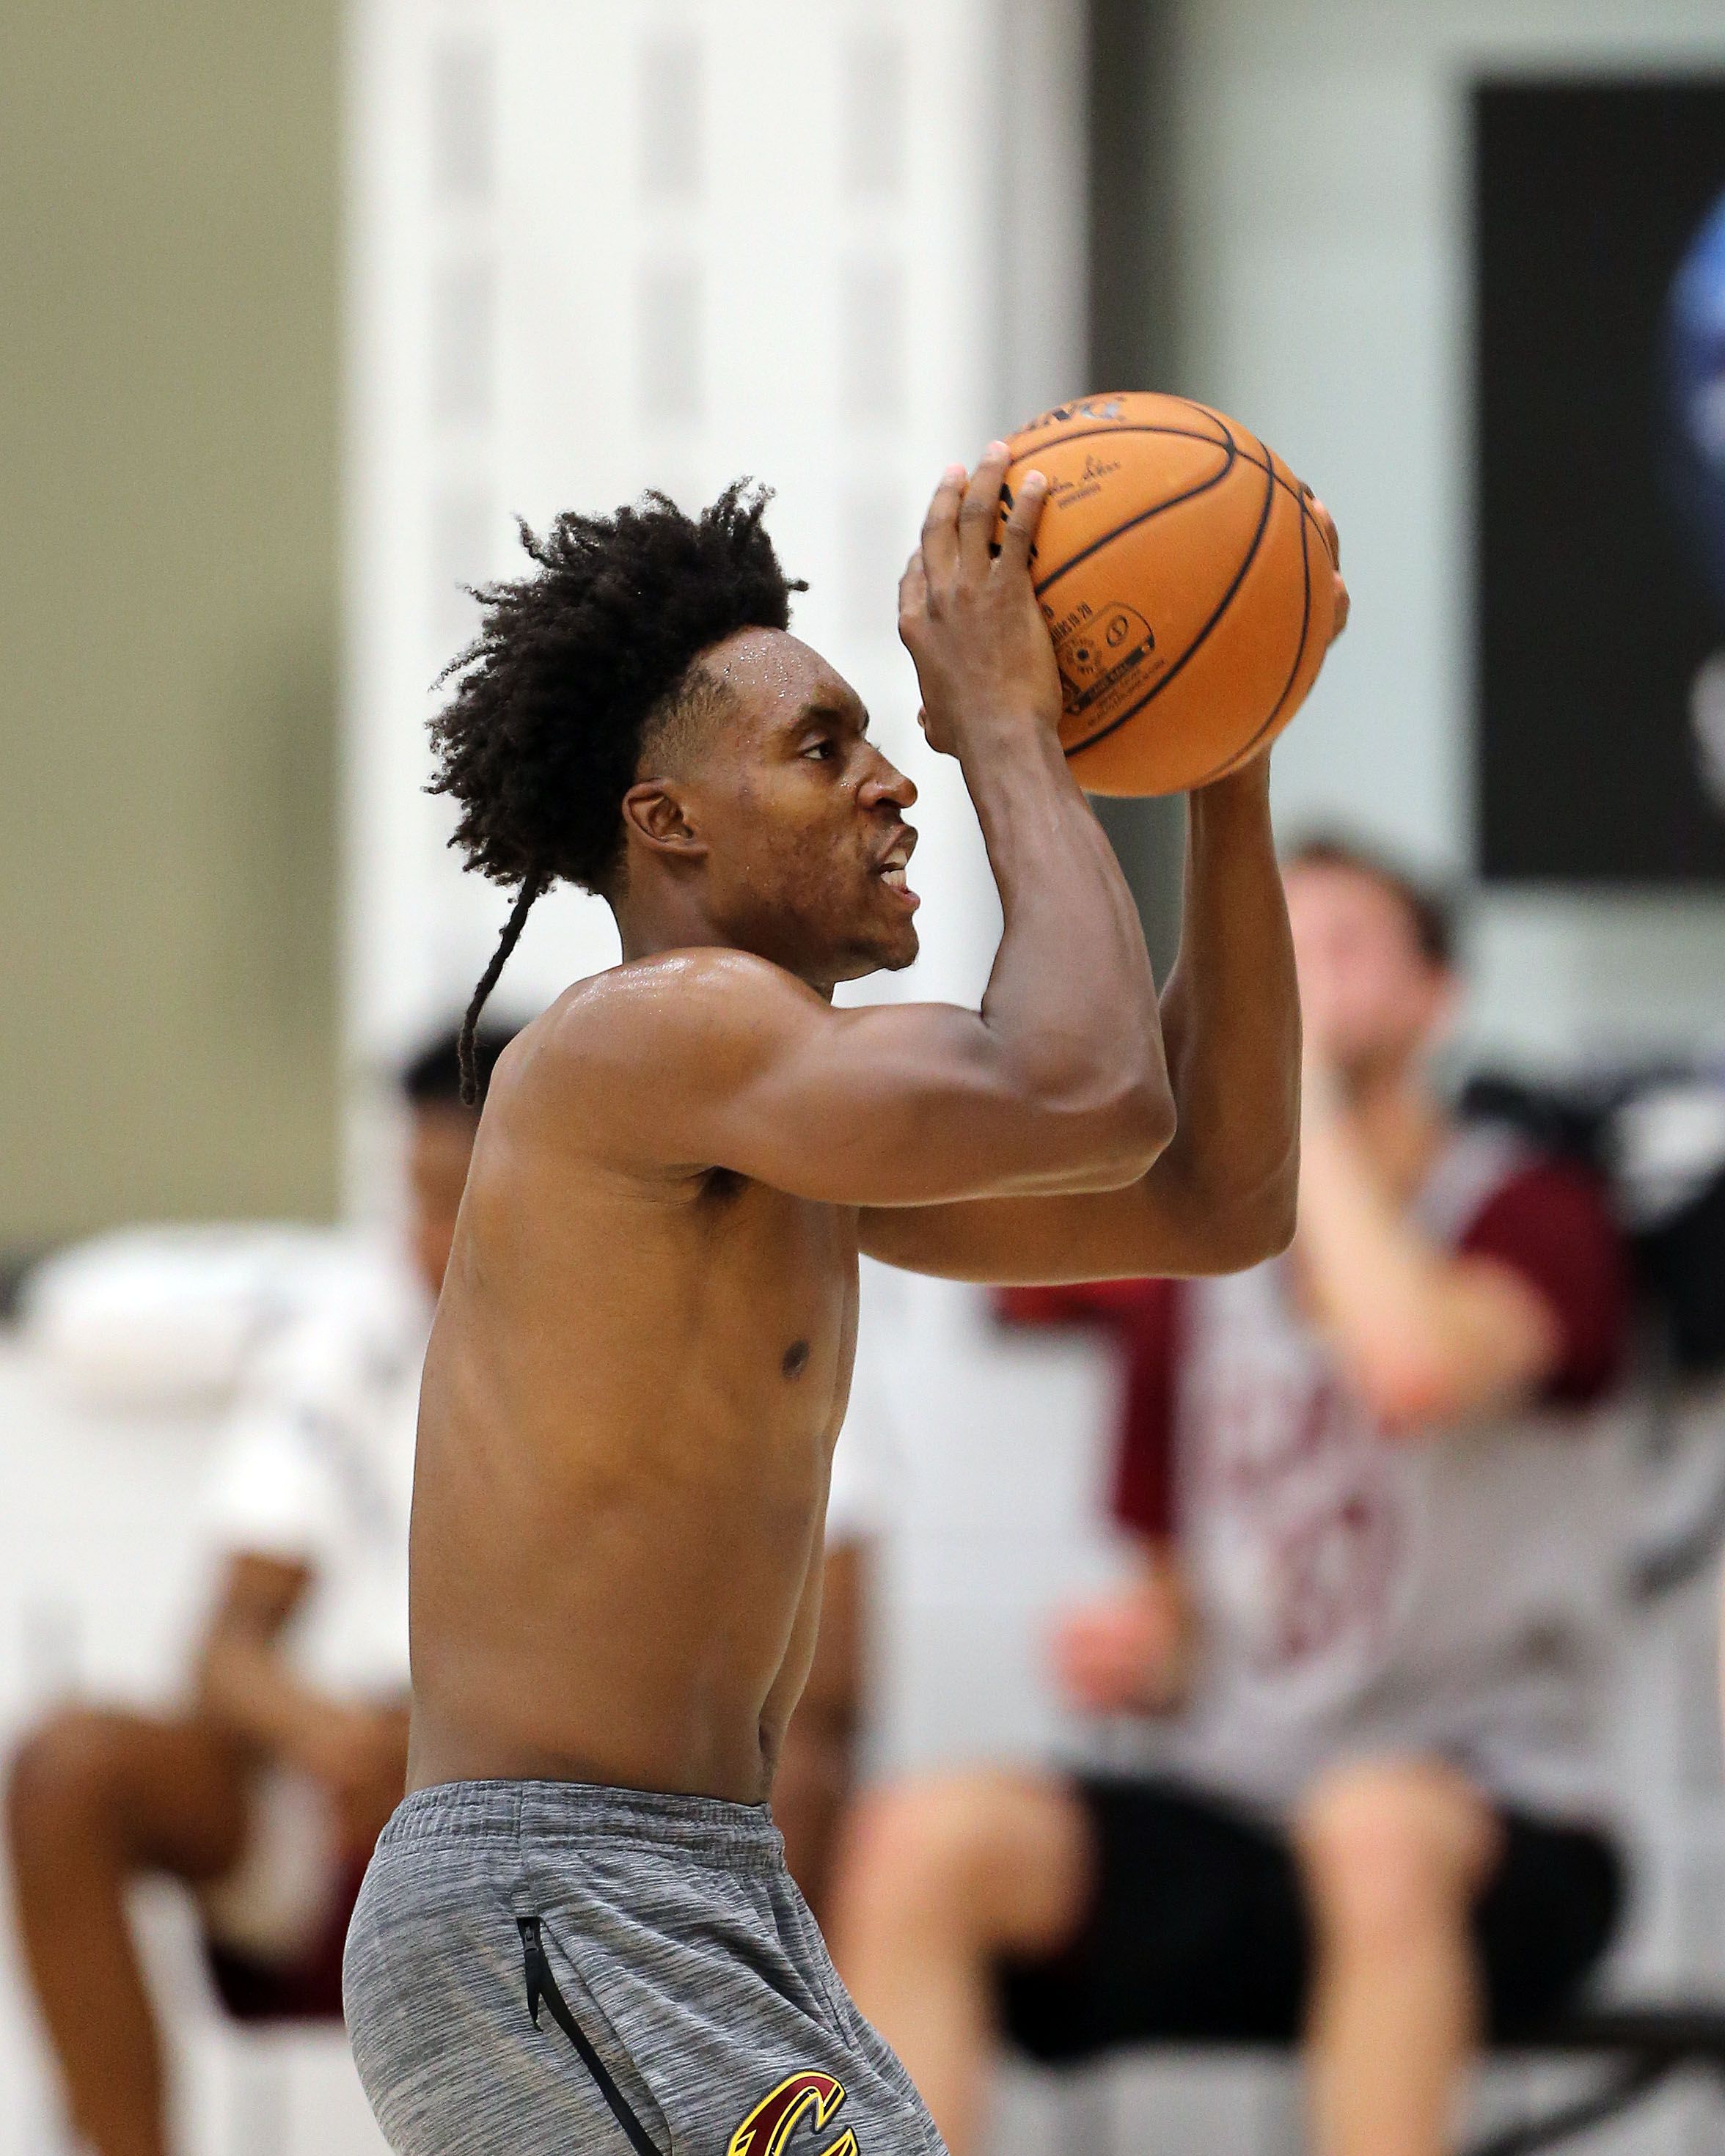 Cavaliers Collin Sexton having issues with teammates